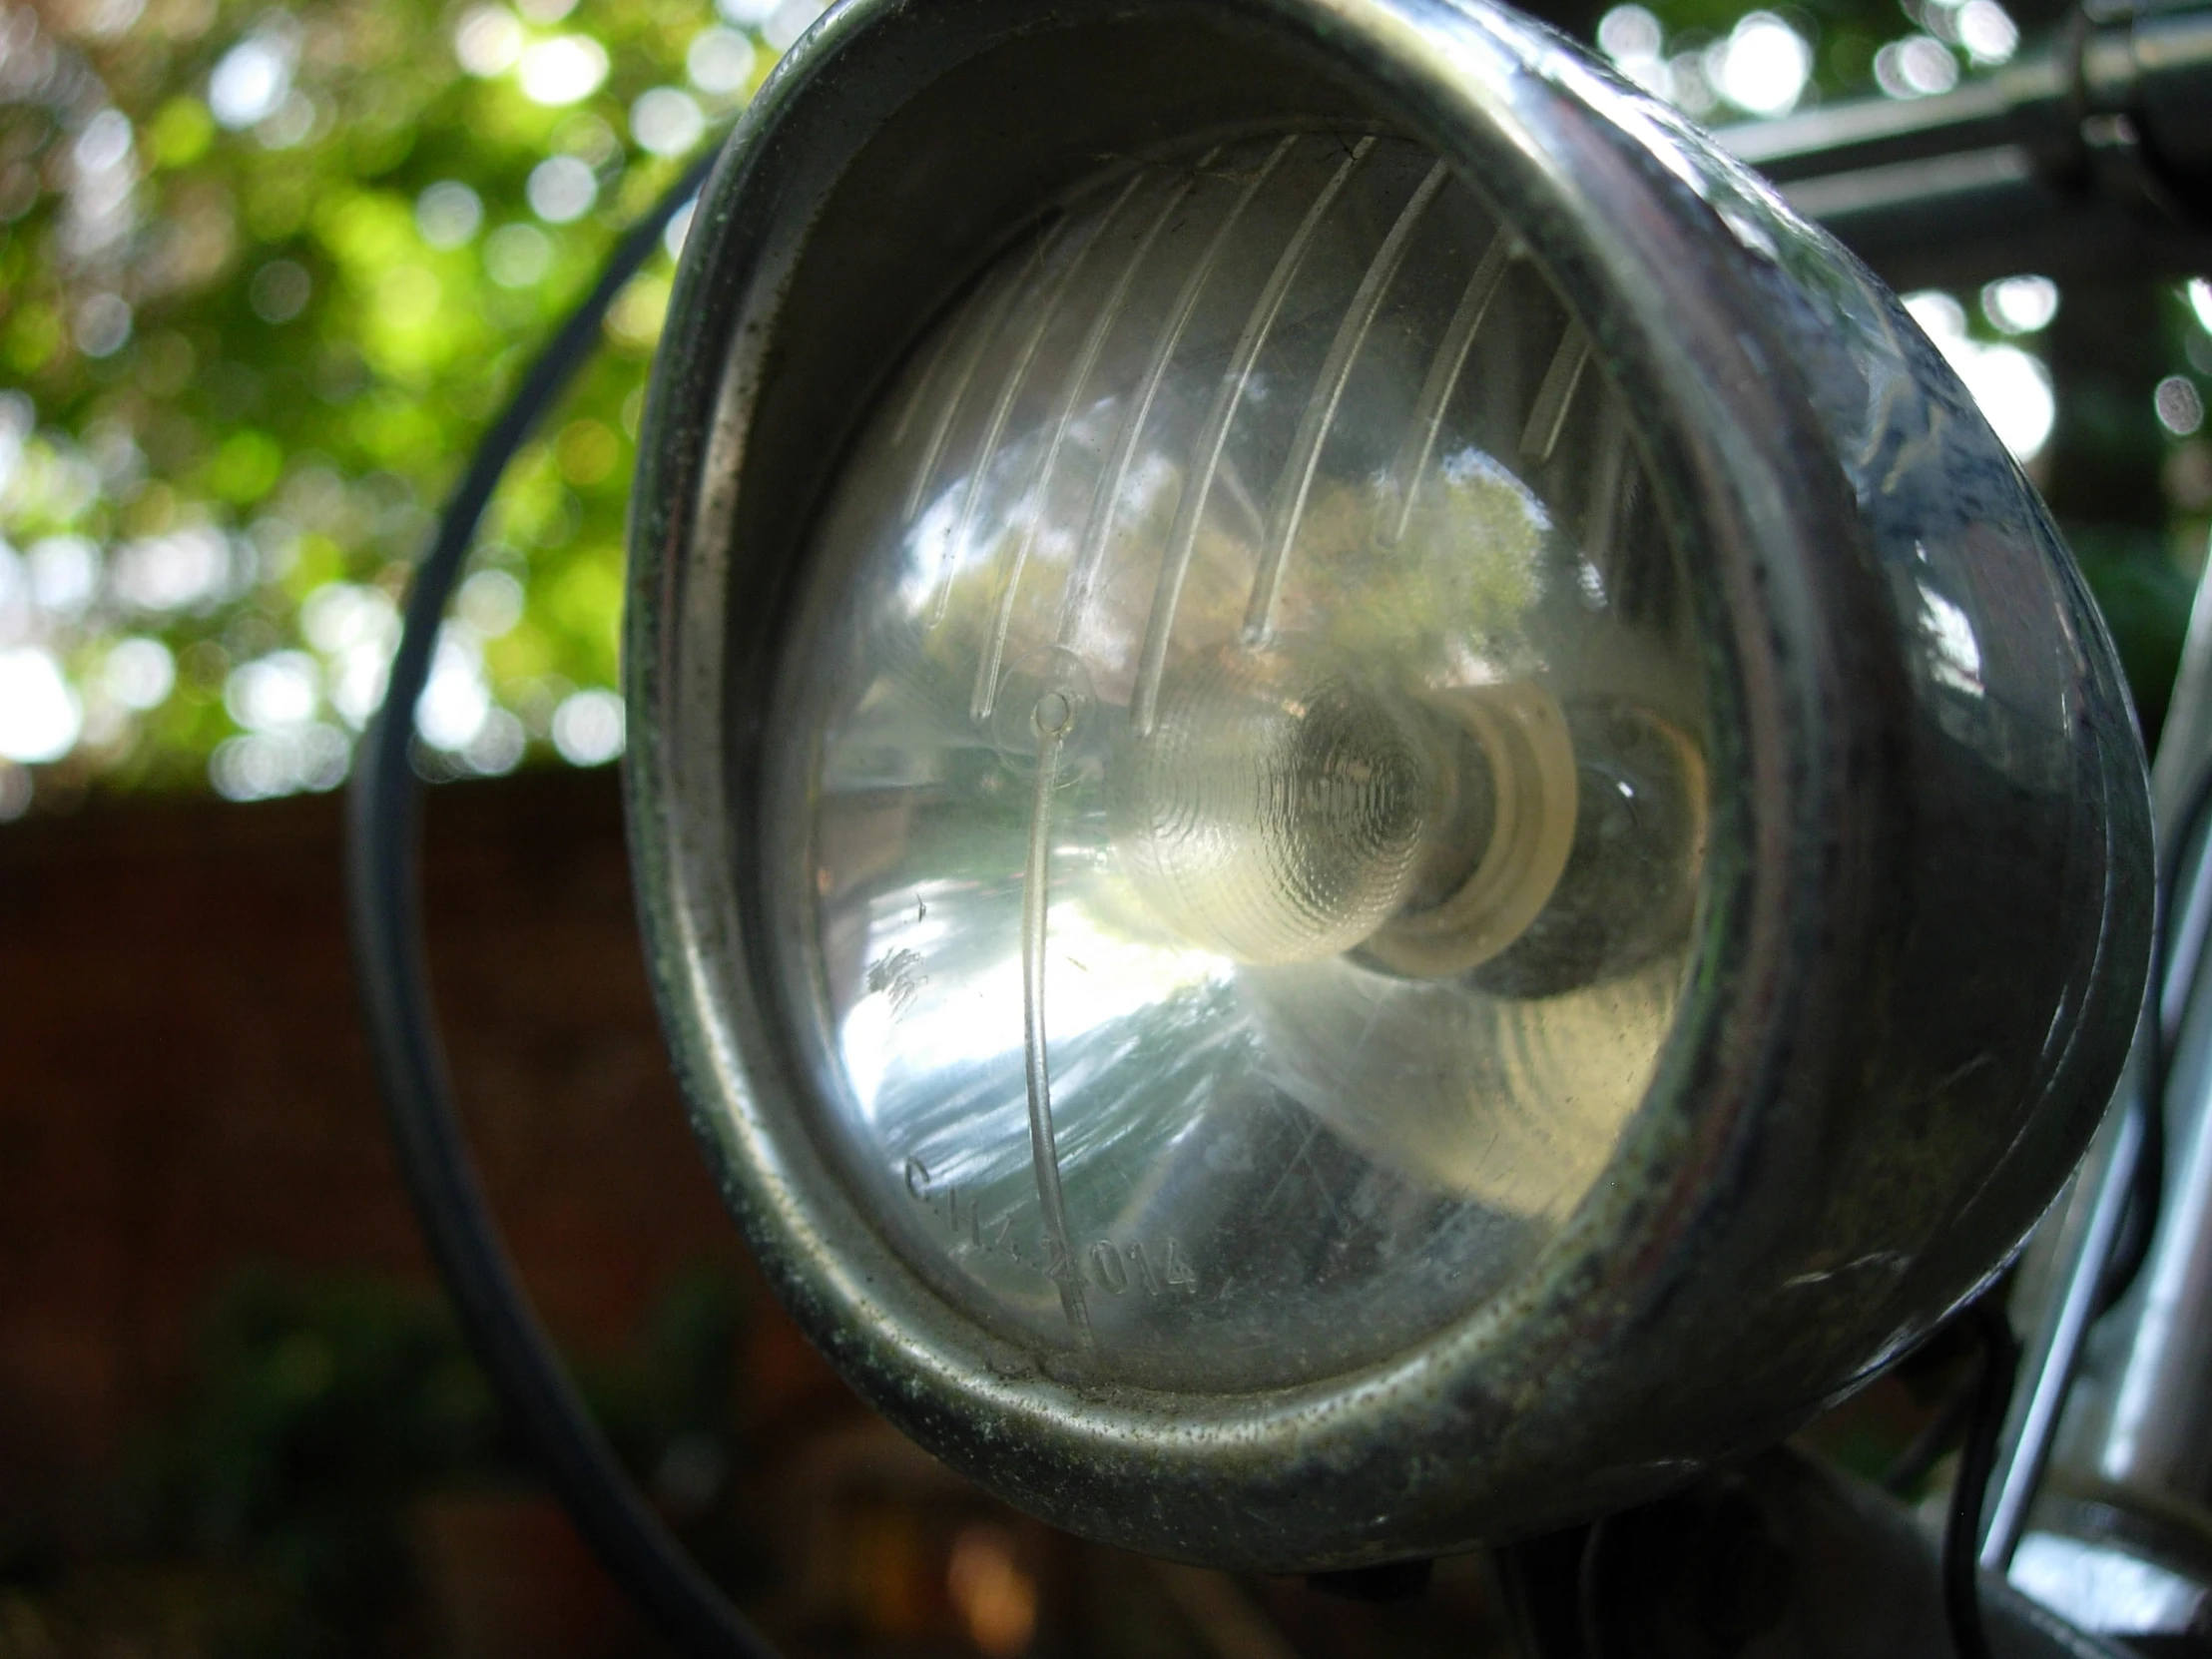 a close up of a headlight of a vehicle